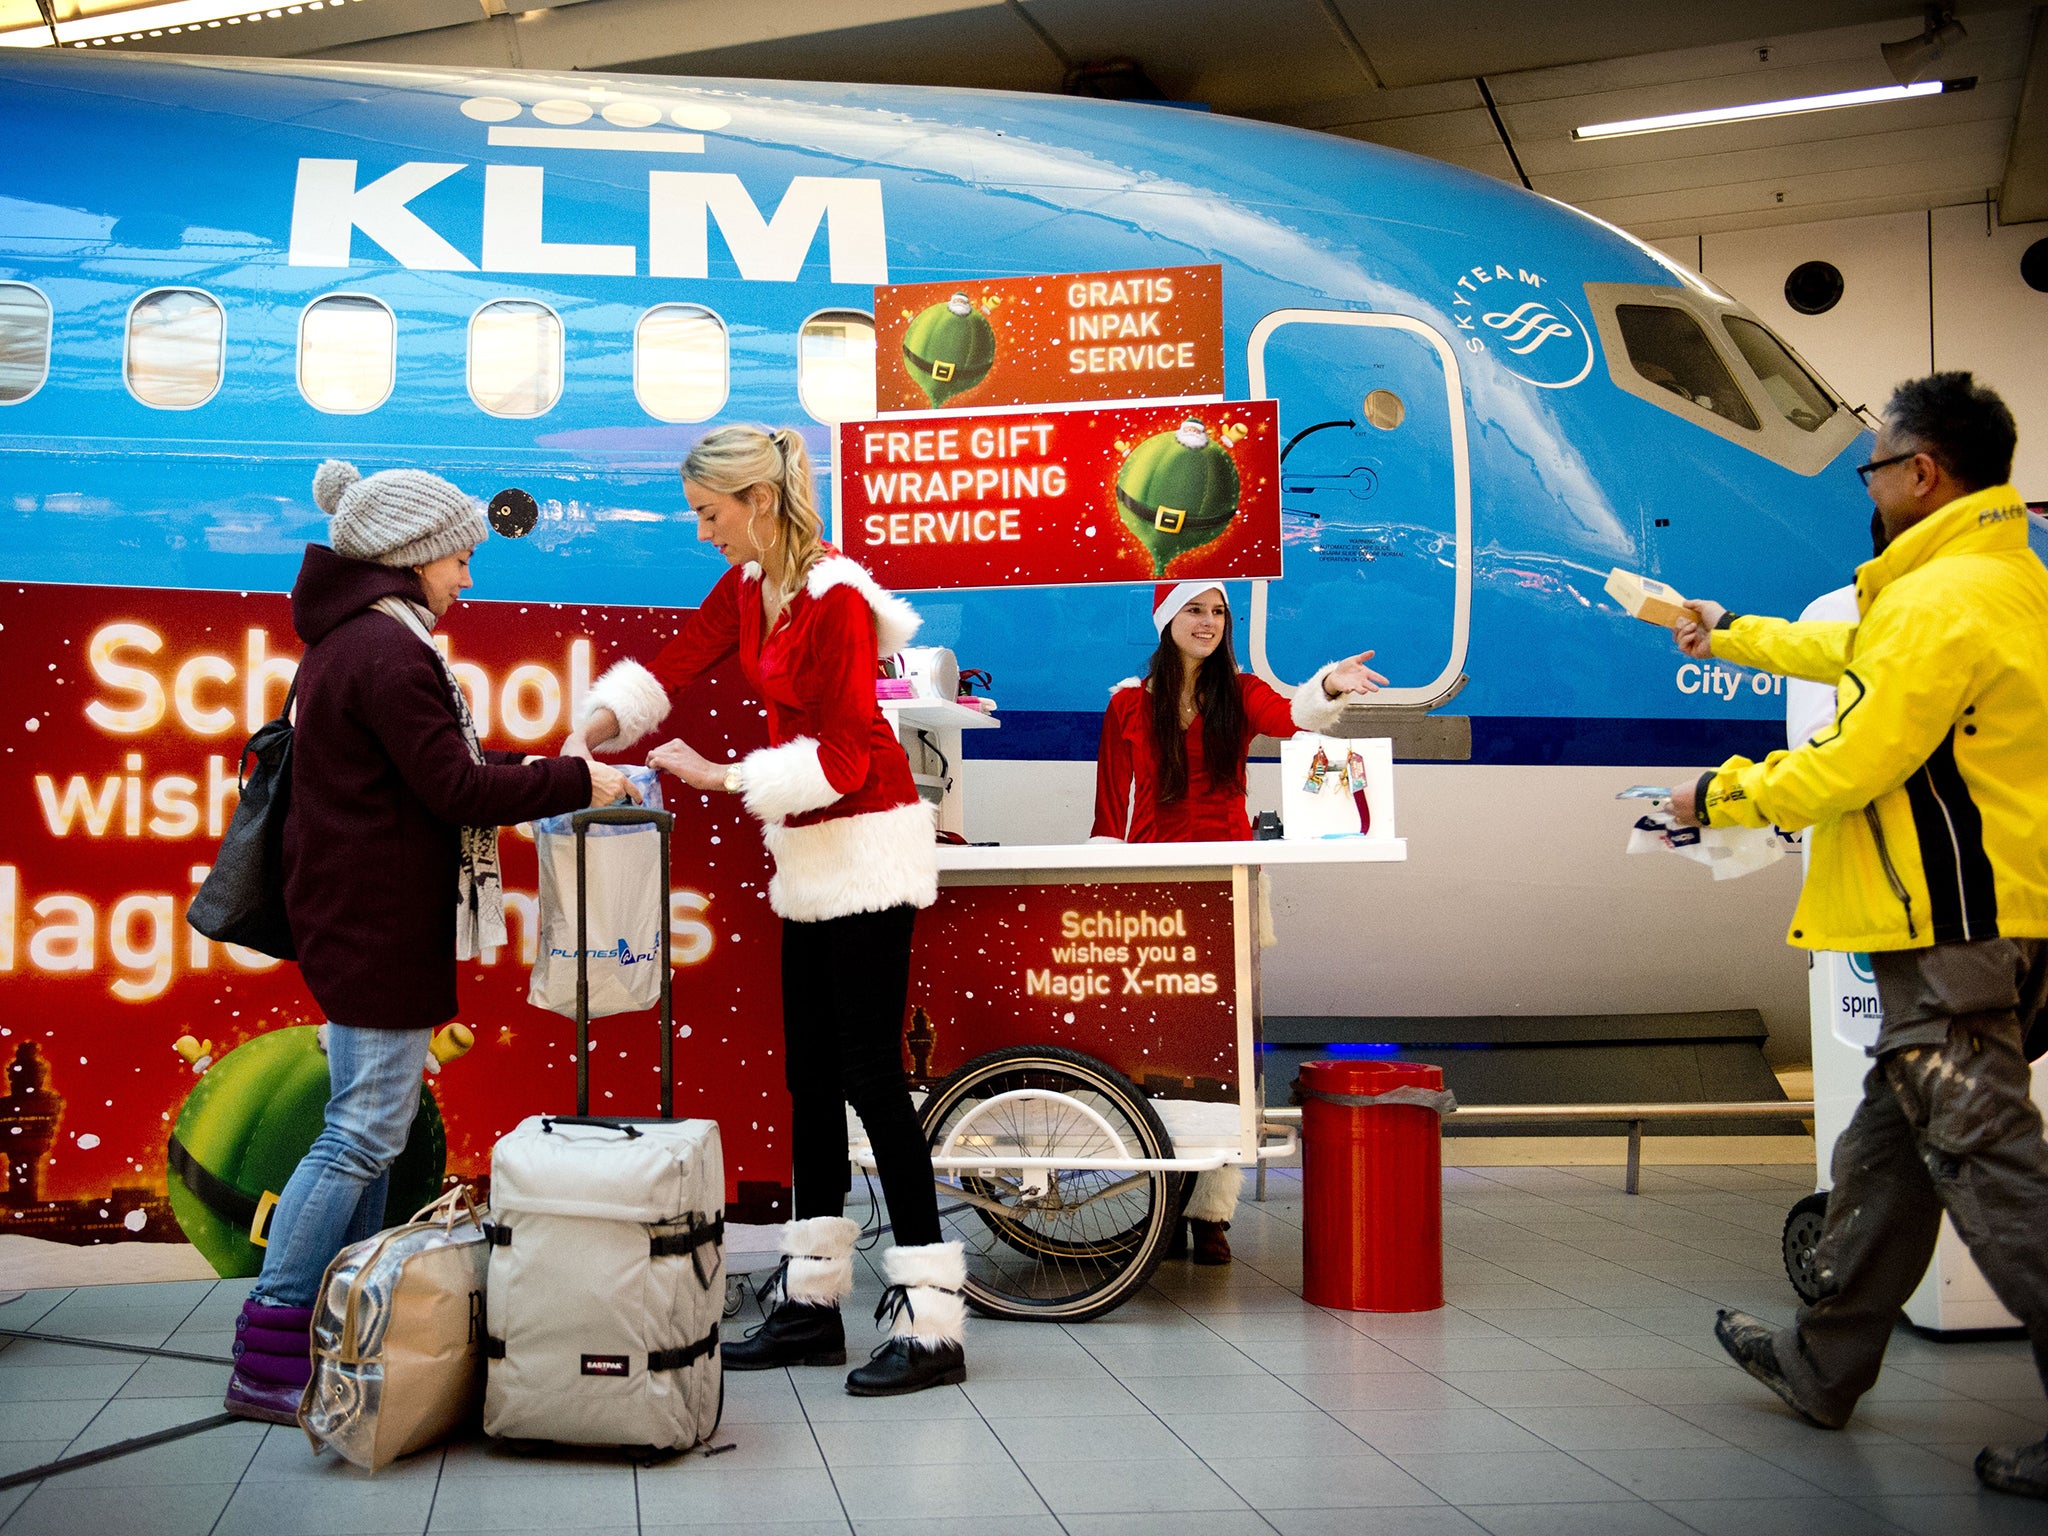 Gift wrapping service is offered at Amsterdam Airport Schiphol, in Schiphol, the Netherlands.